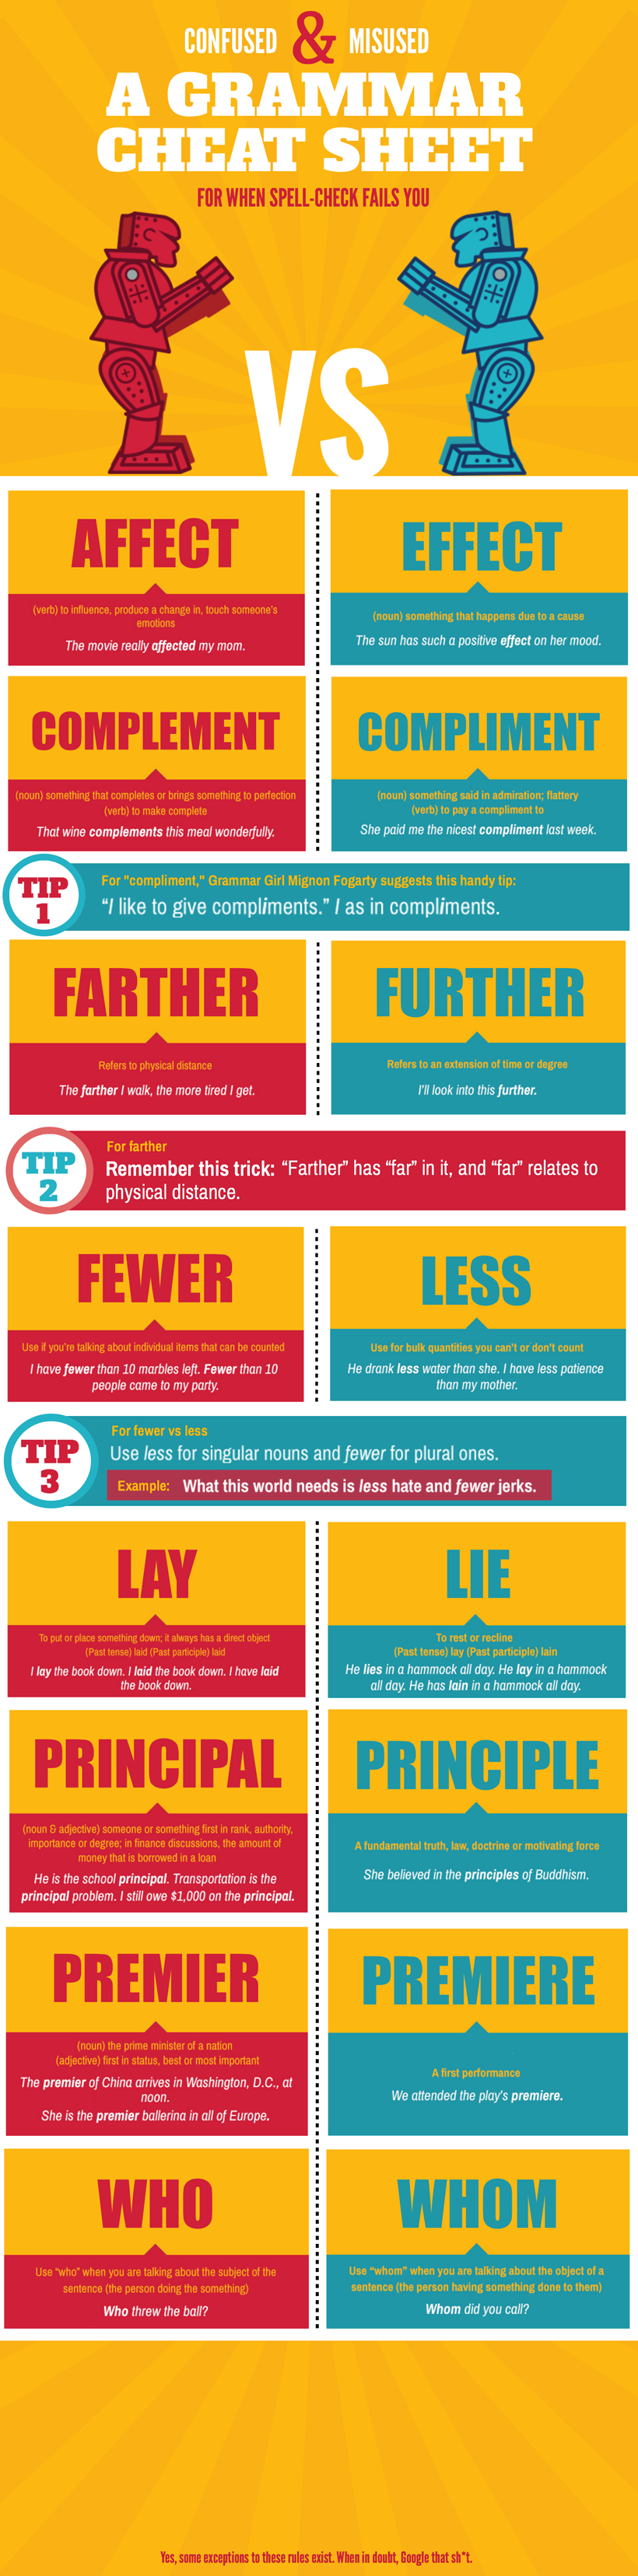 Infographic - Confused & Misused: A Grammar Cheat Sheet 